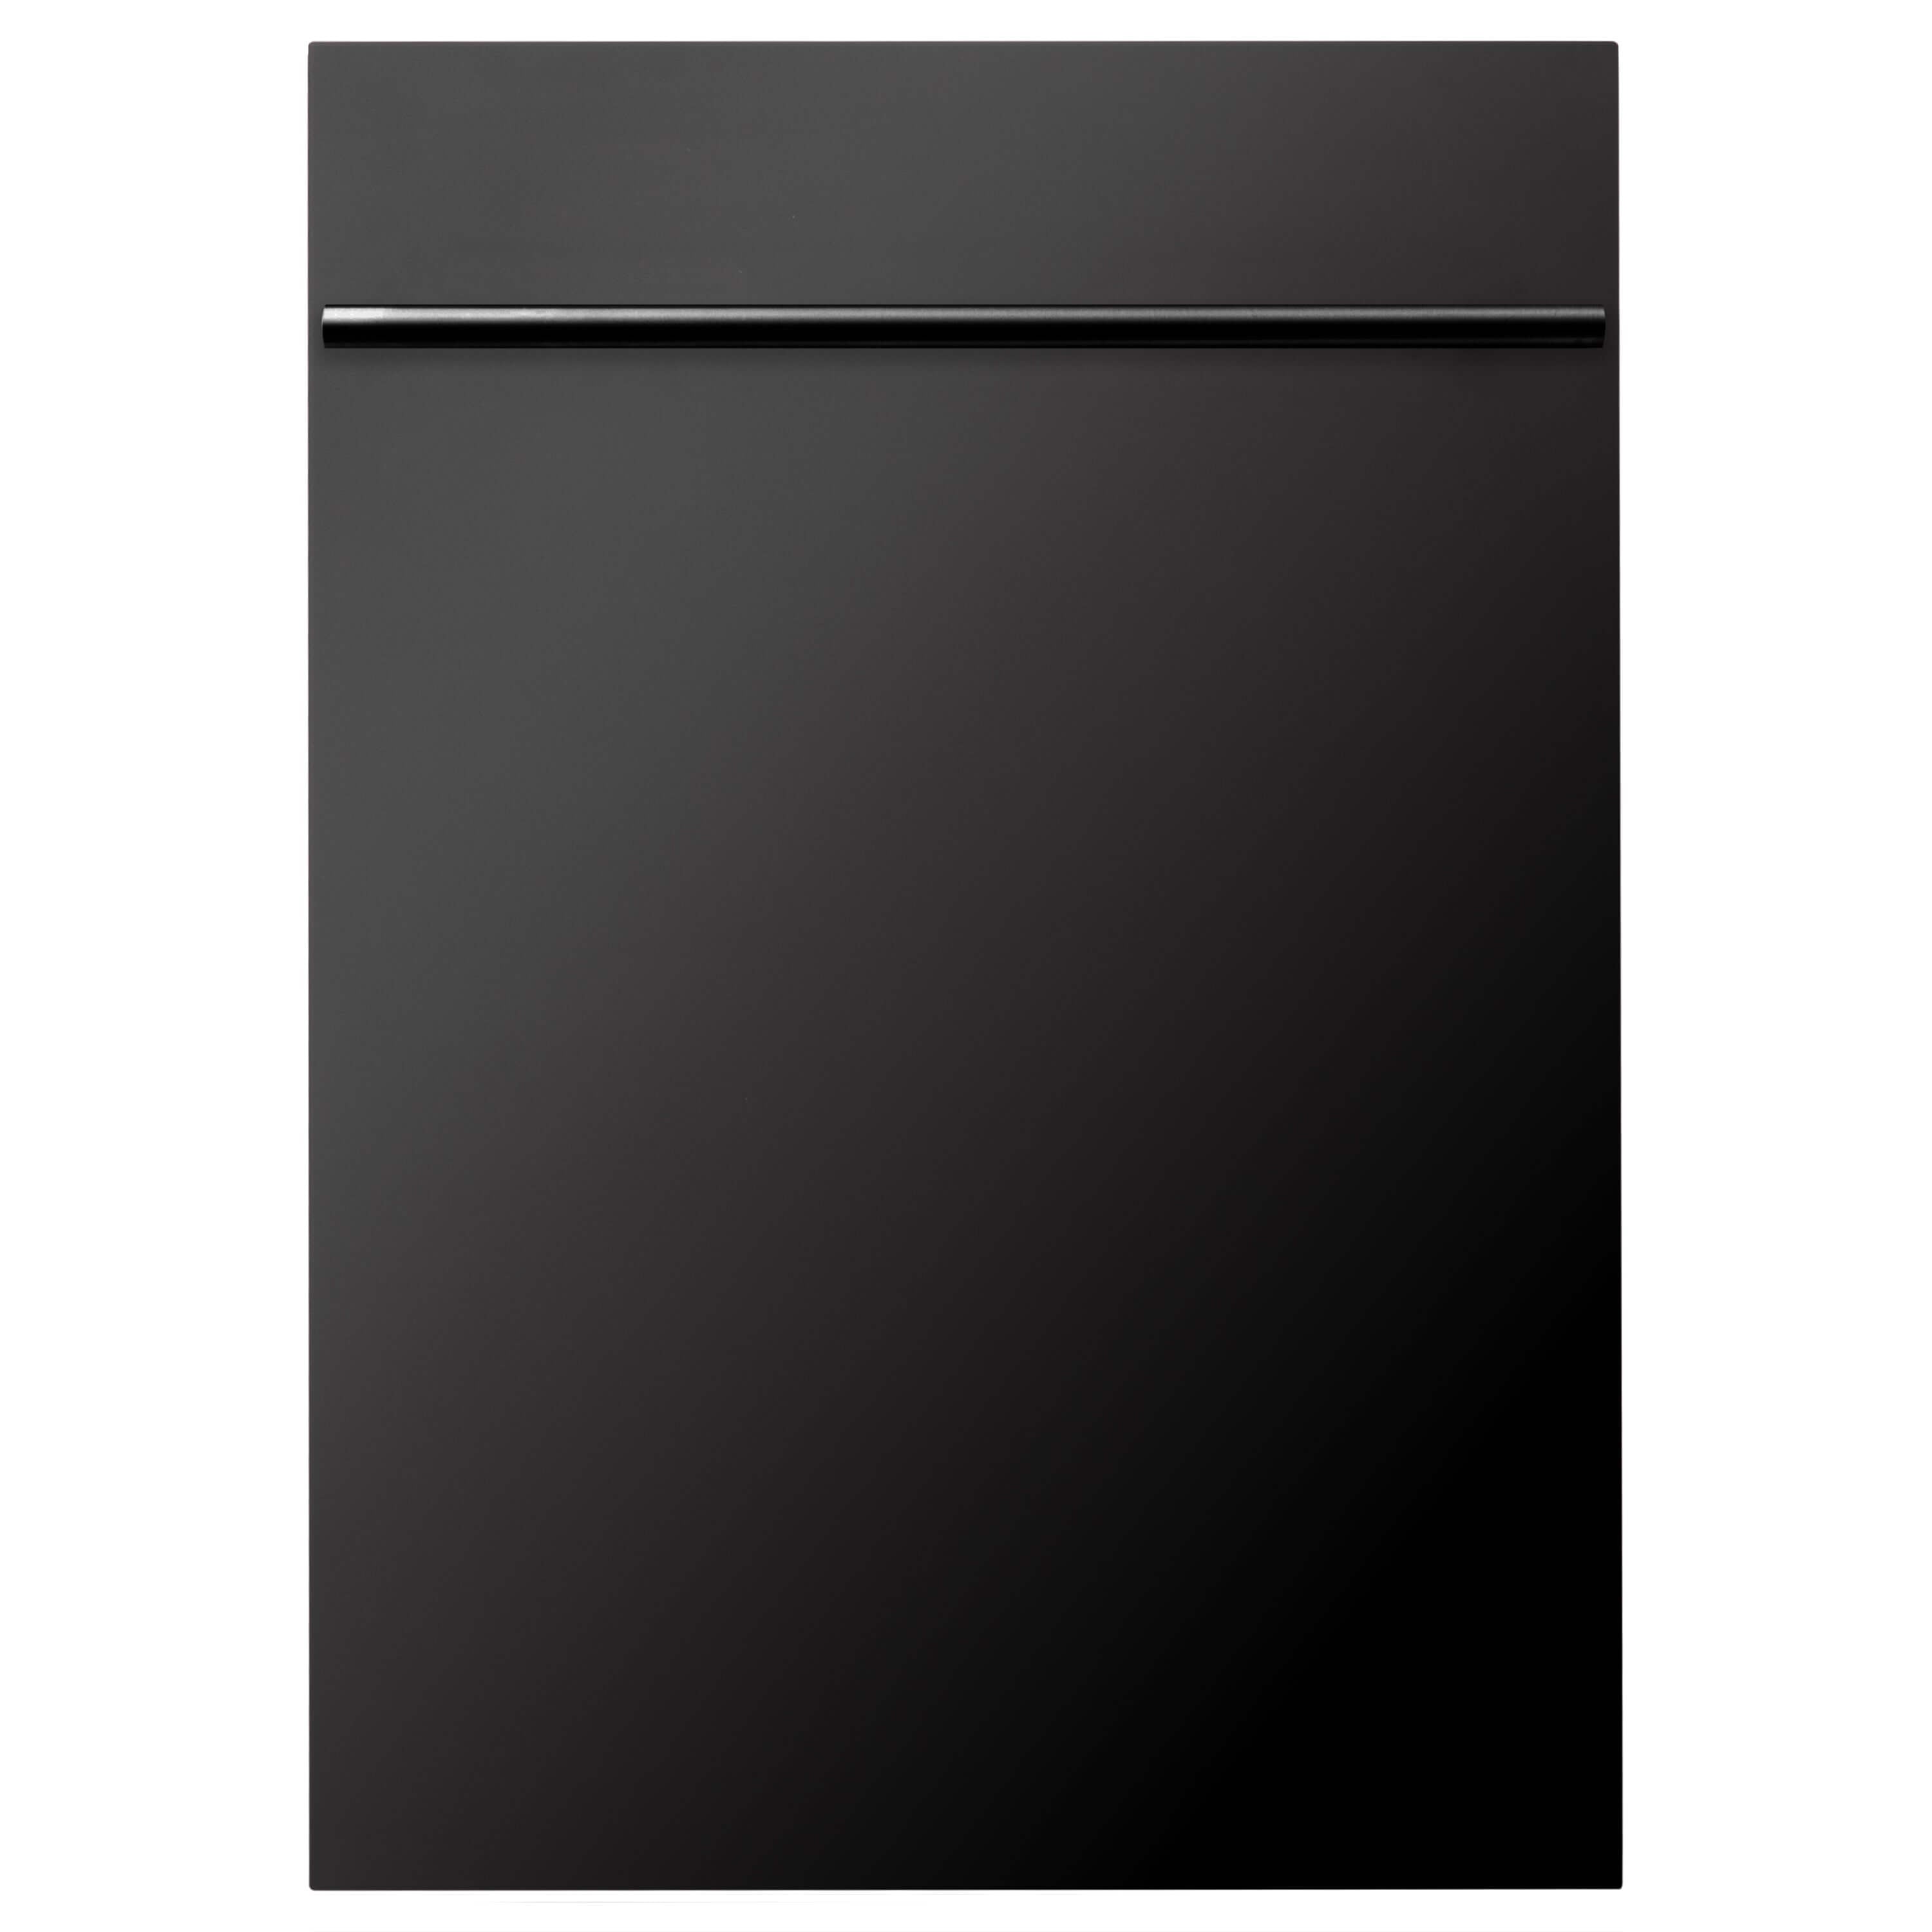 ZLINE 18 in. Compact Black Stainless Steel Top Control Built-In Dishwasher with Stainless Steel Tub and Modern Style Handle, 52dBa (DW-BS-H-18)